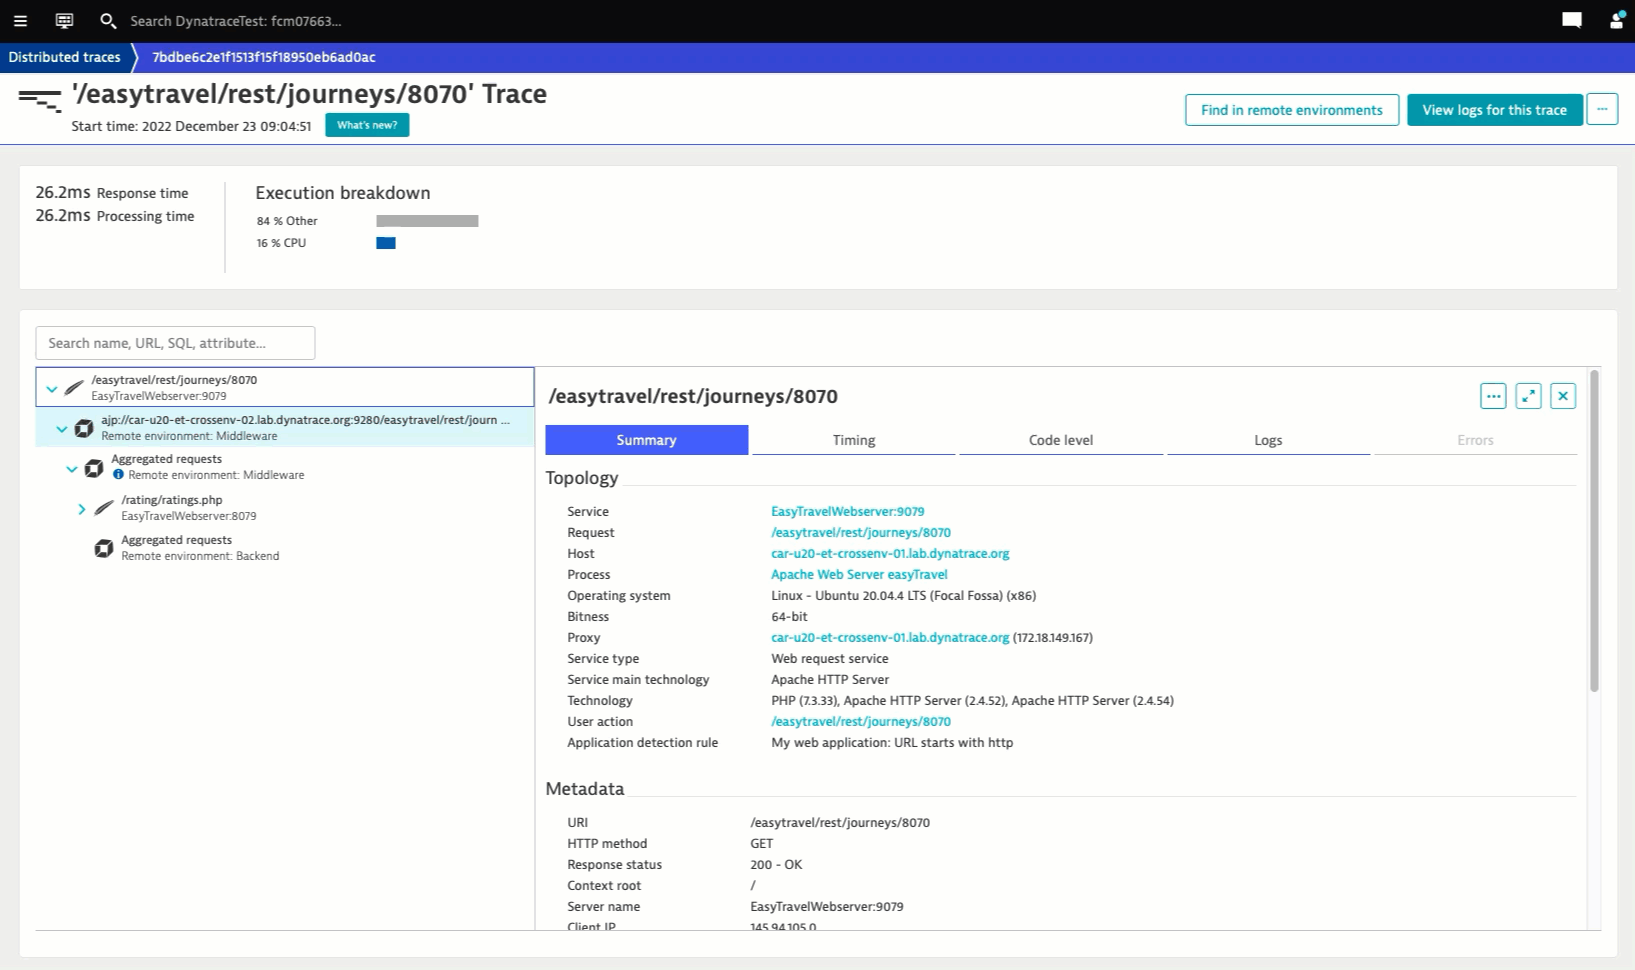 https://dynatrace.sharepoint.com/:i:/r/sites/appsmicroservices/Shared%20Documents/Roadmap/Value%20Packs/%5BPRODUCT-3029%5D%20Up-level%20traceability%20with%20cross-environment%20tracing/Blog%20images/DistTrace_CrossEnvi.gif?csf=1&web=1&e=ewpWIP